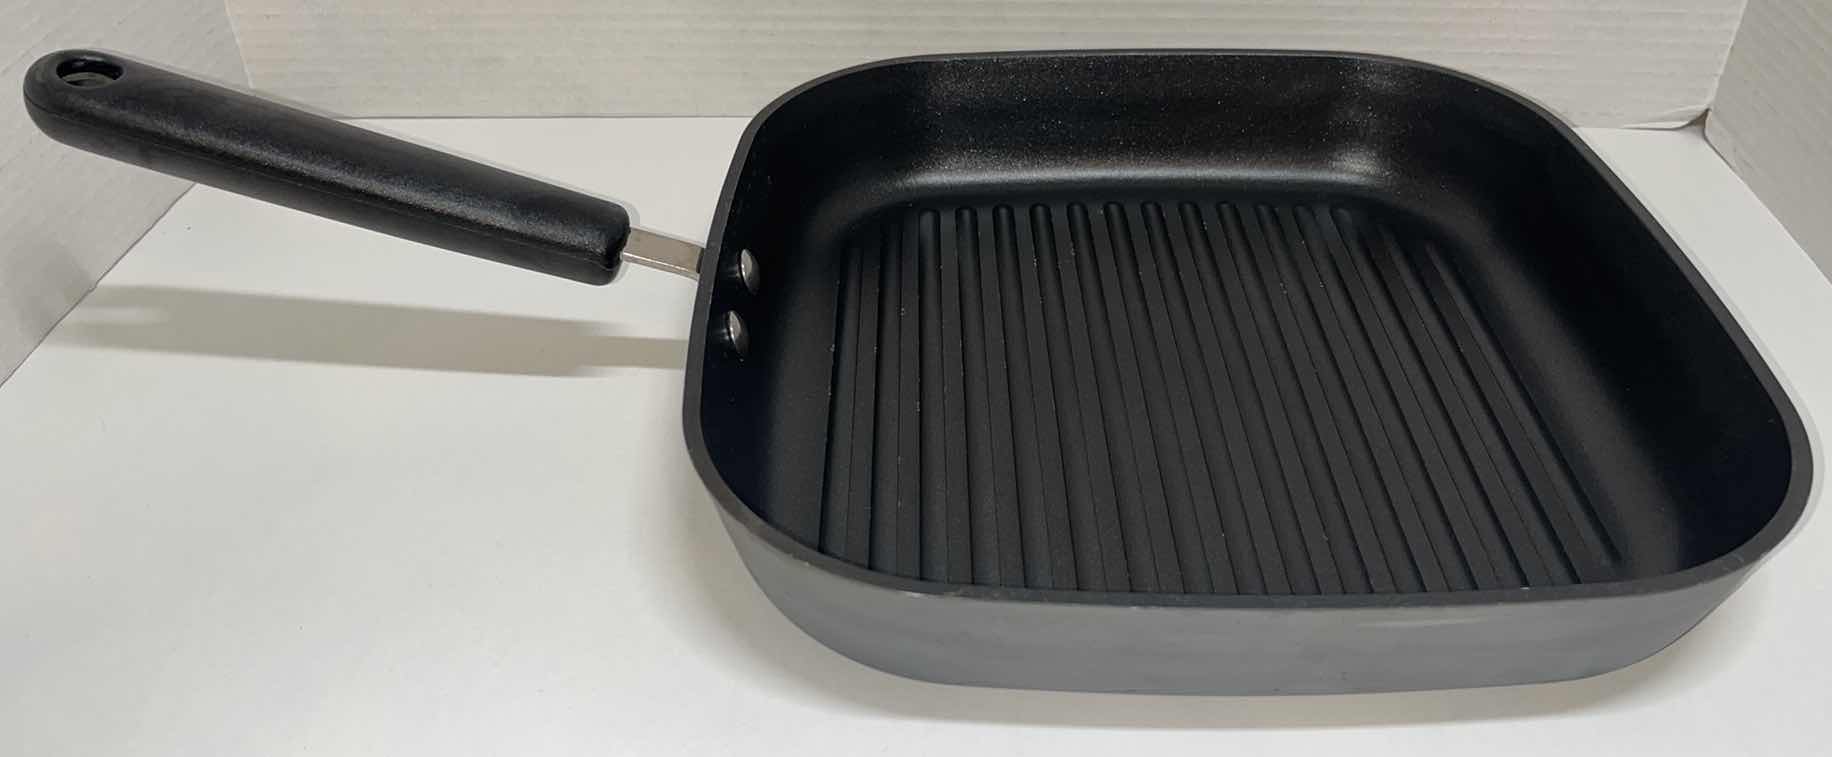 Photo 2 of PAMPERED CHEF 10.5” NON-STICK SQUARE GRILL PAN & ECOLUTION 11” SQUARE NON-STICK FLAT GRIDDLE PAN